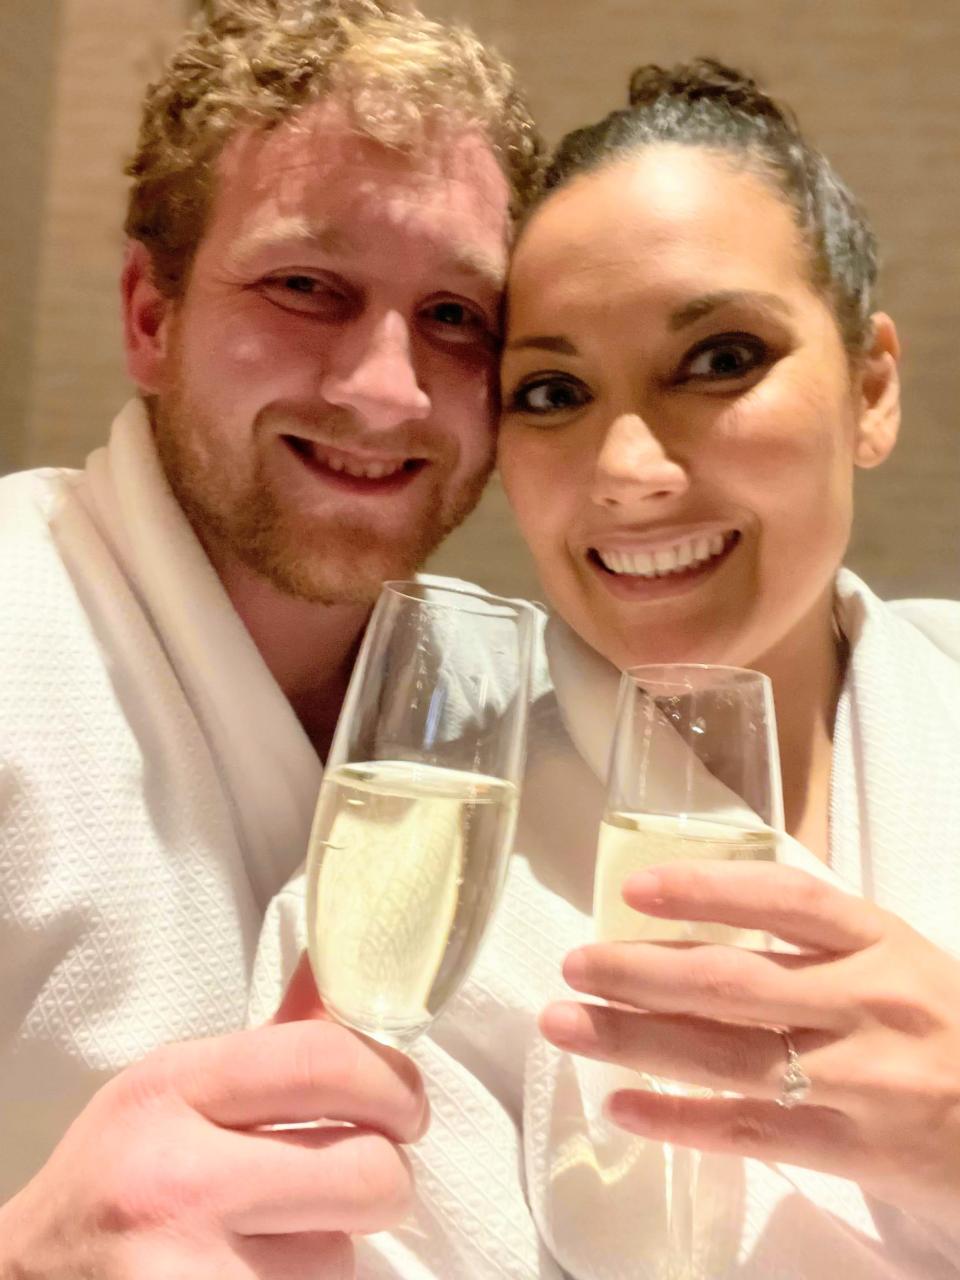 Two people in spa bath robes drink champagne while waiting to get a massage